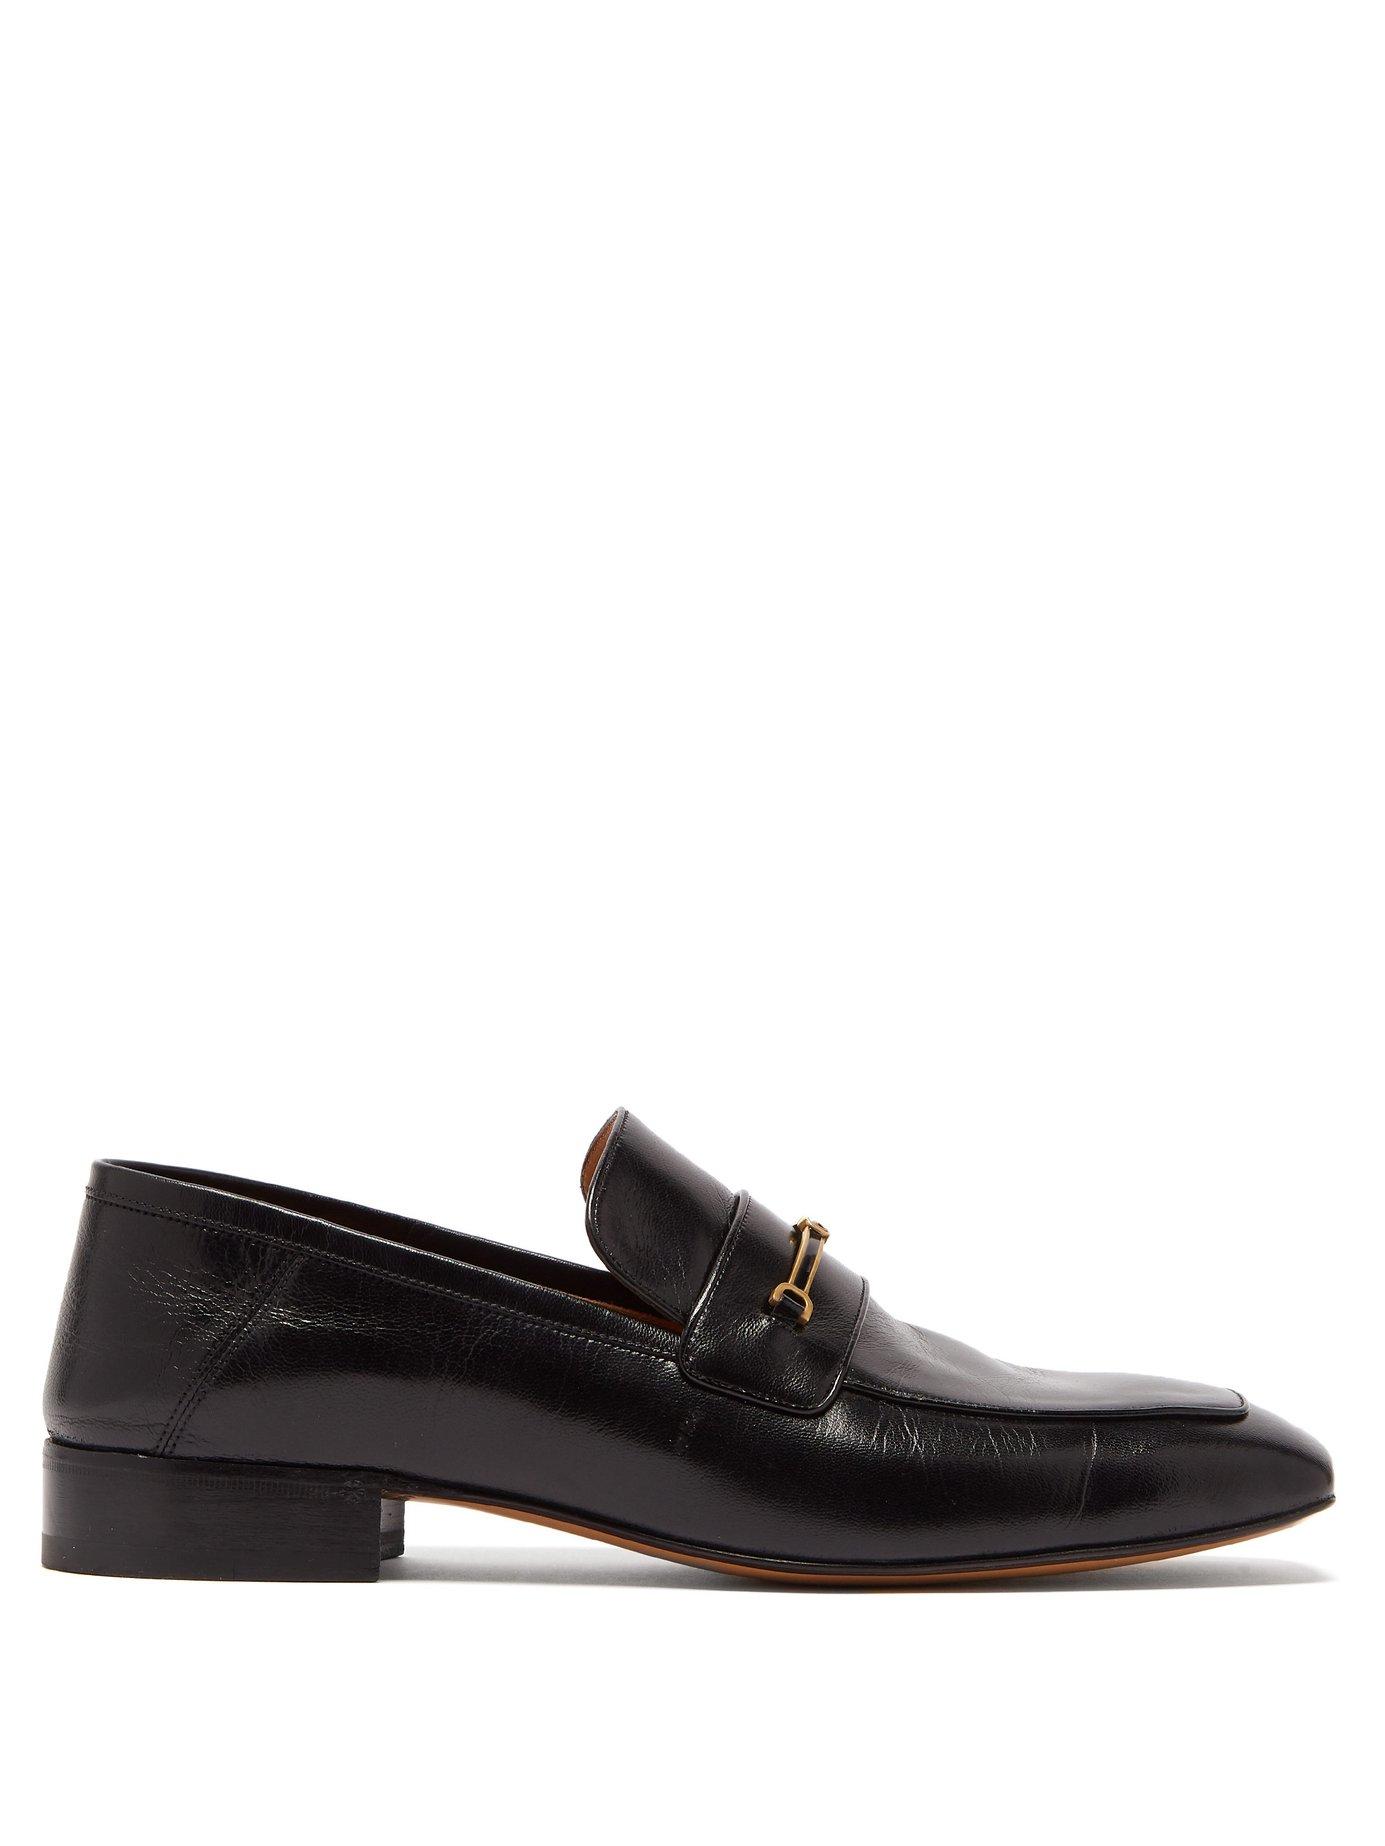 Gucci Quentin Gg Horsebit Leather Loafers in Black for Men | Lyst